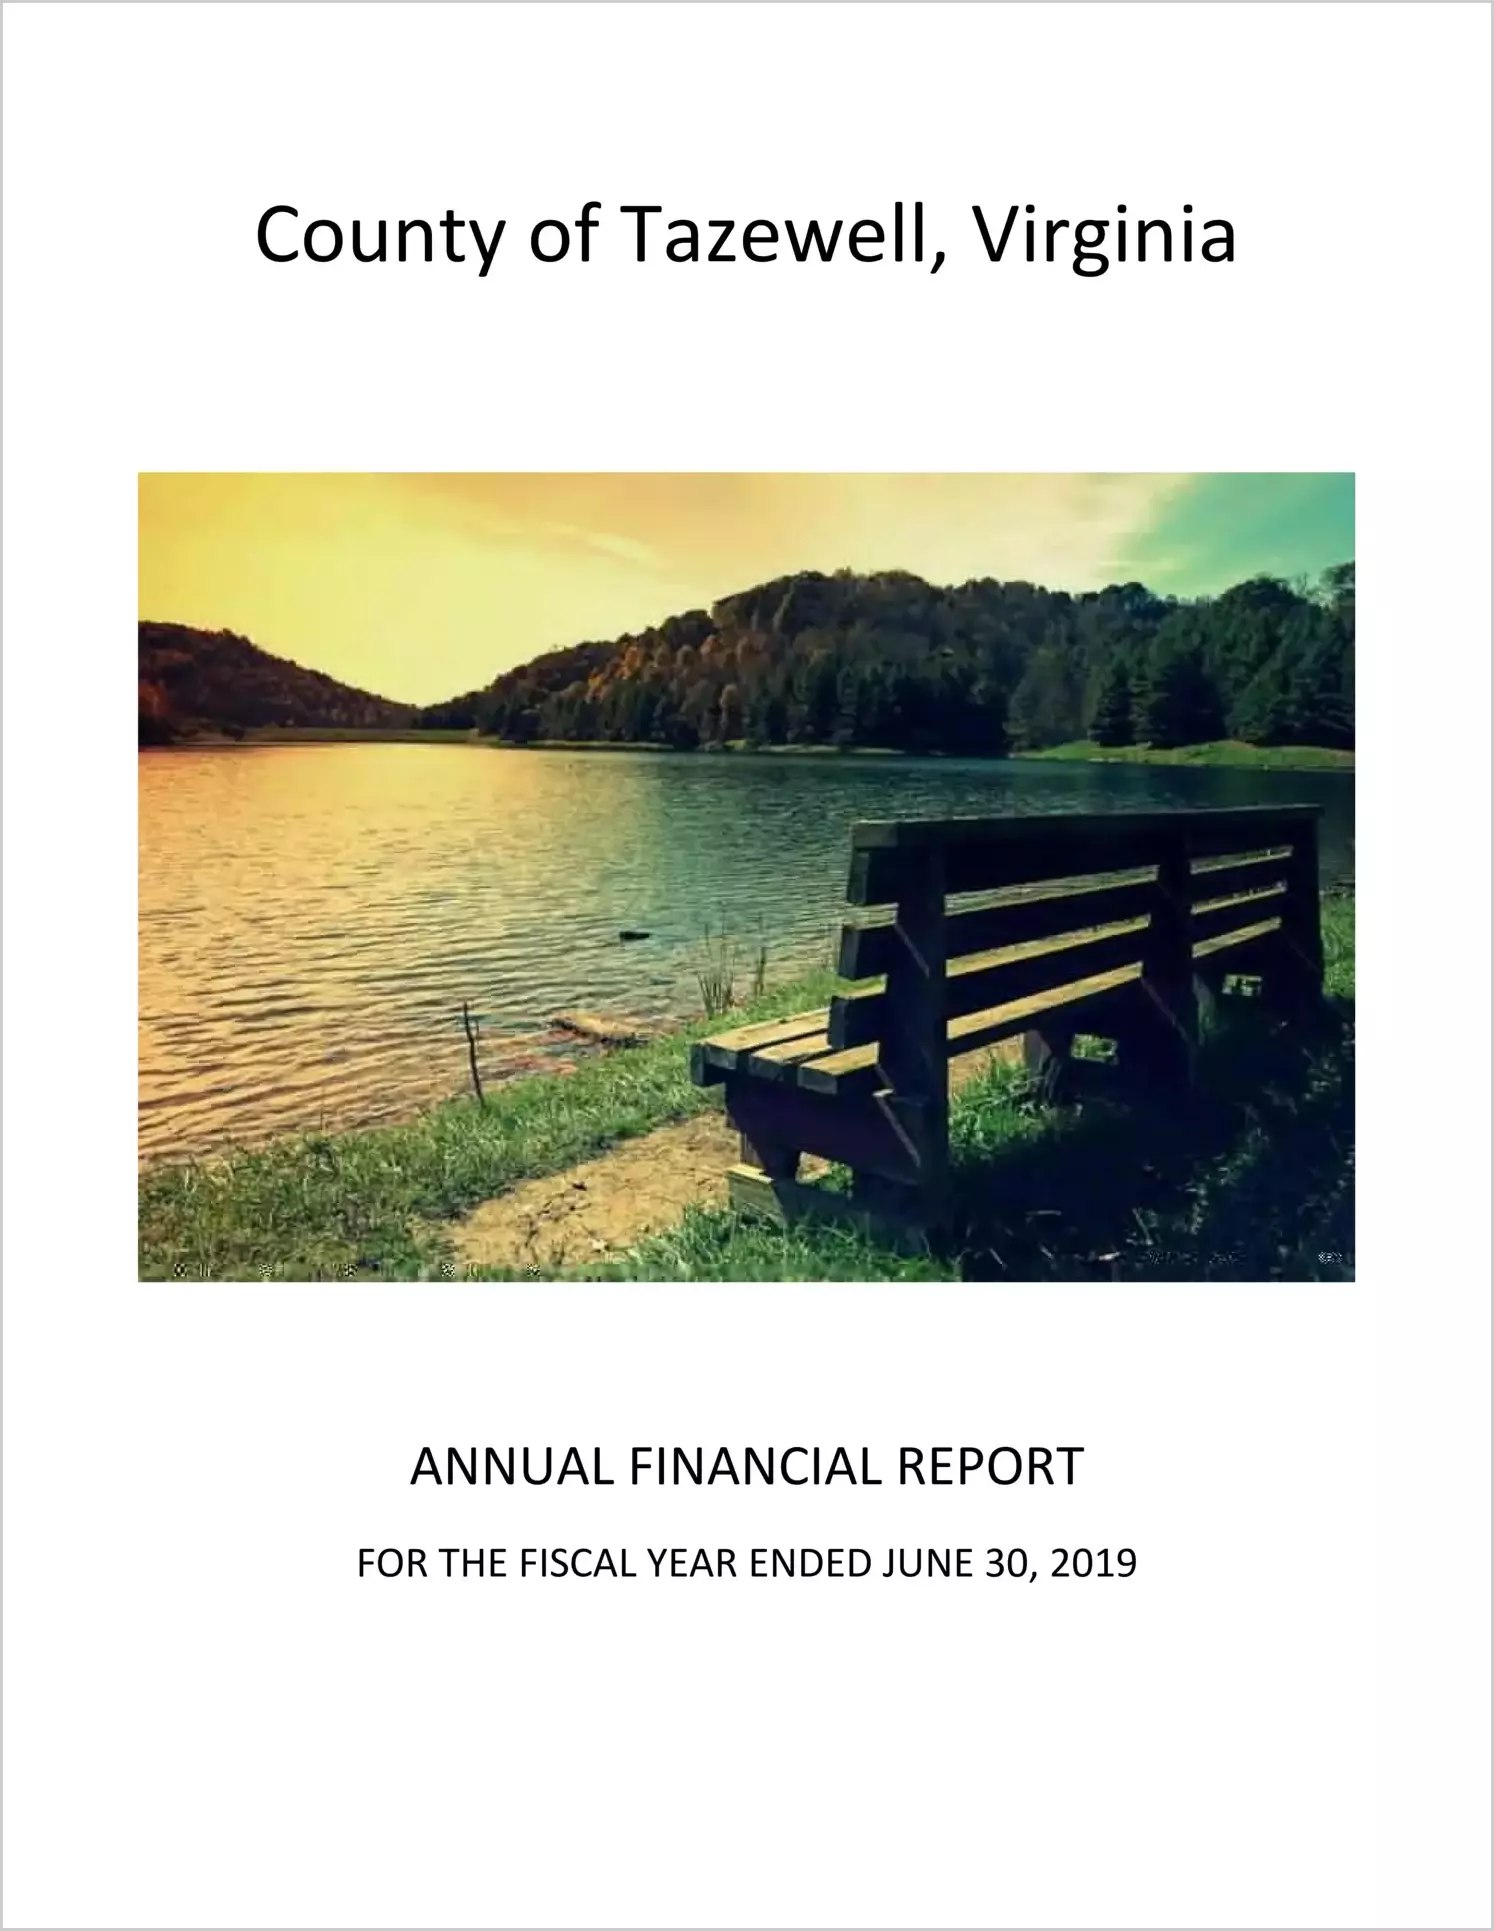 2019 Annual Financial Report for County of Tazewell